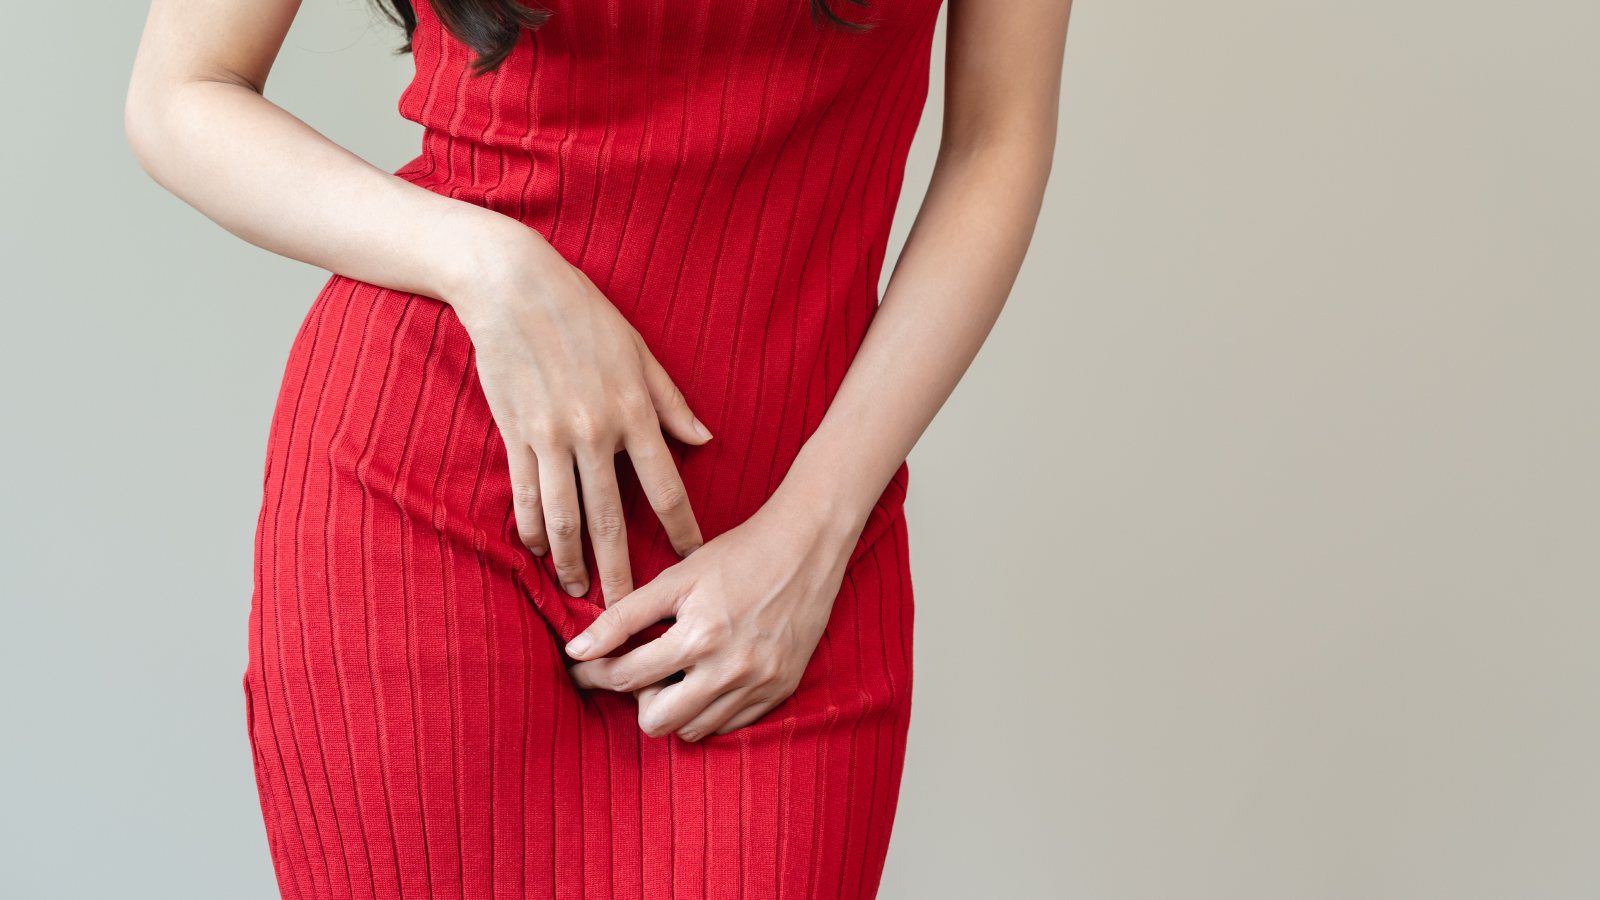 Yellow vaginal discharge: What causes it and tips to prevent it